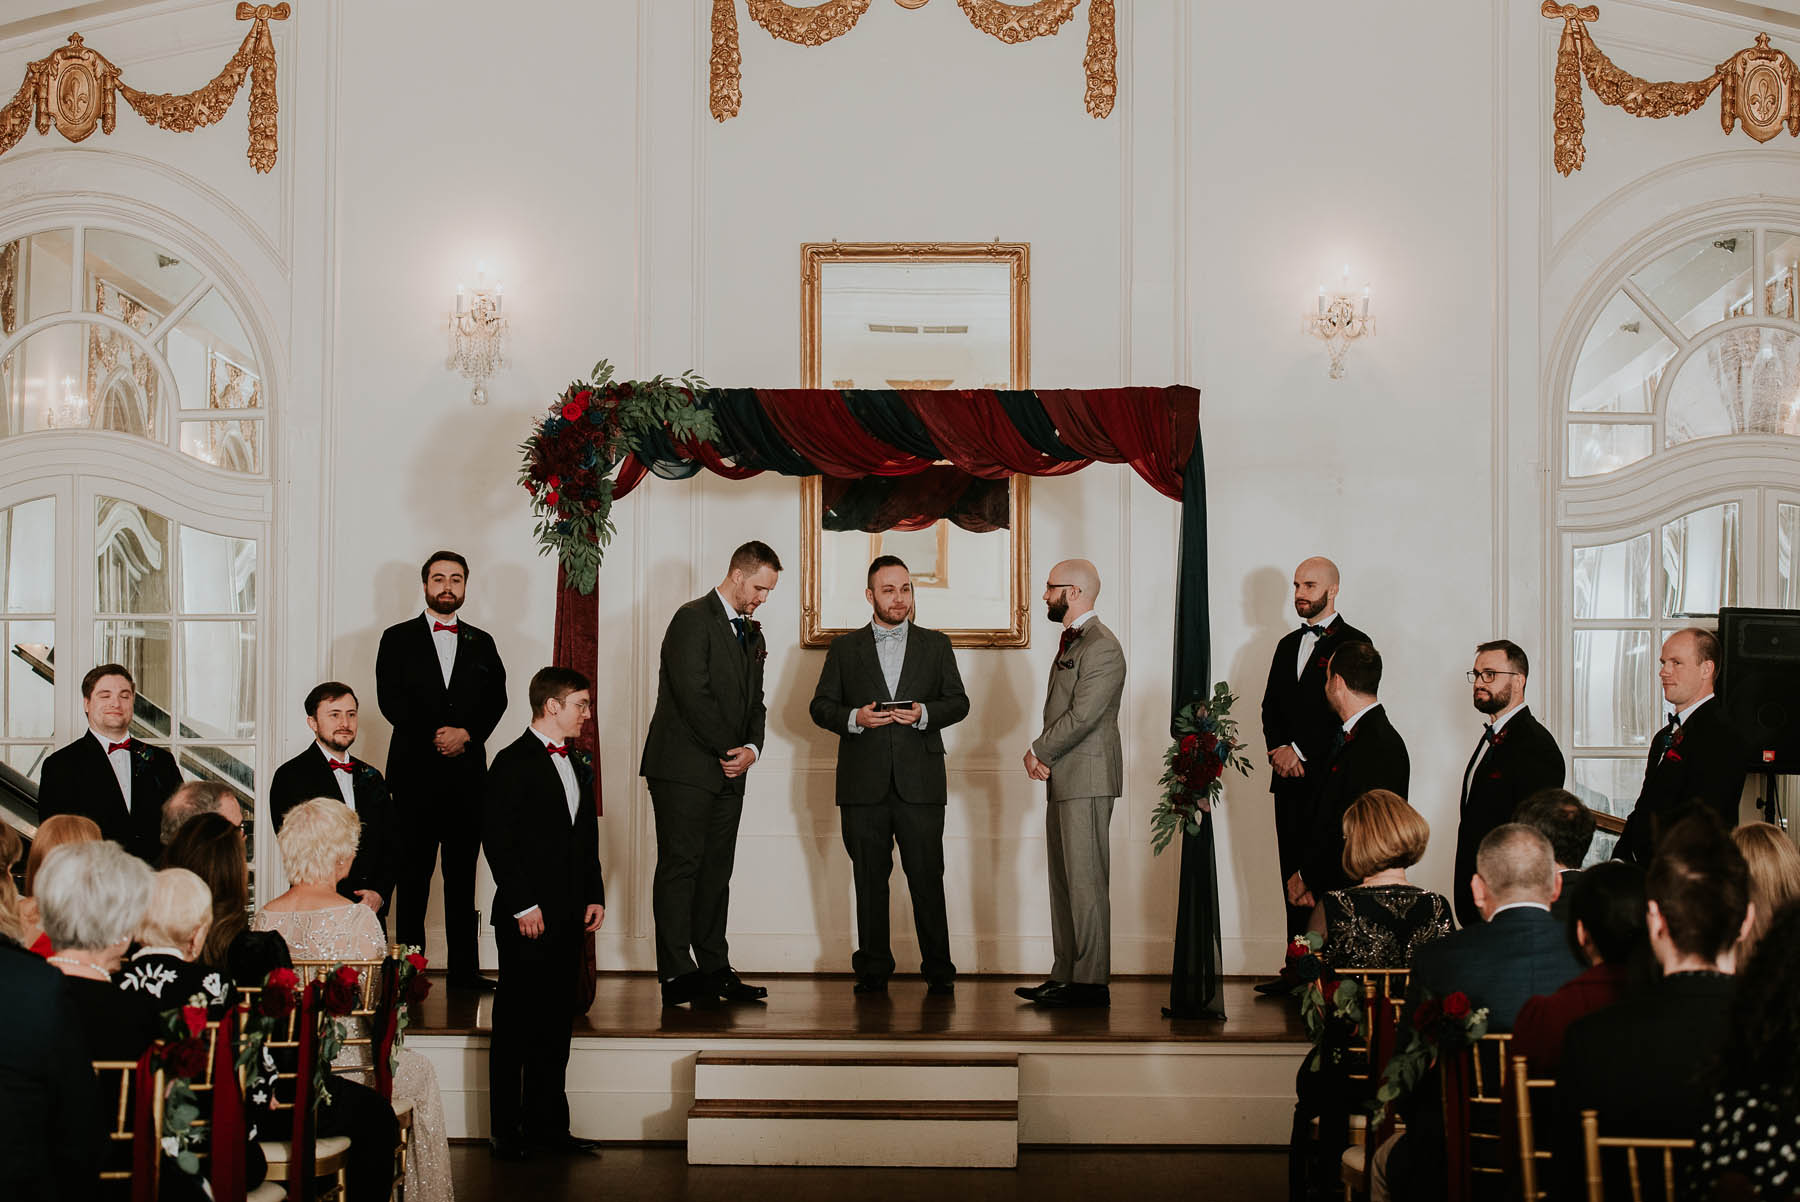 Two white men stand under a burgundy draped arbor and exchange vows.